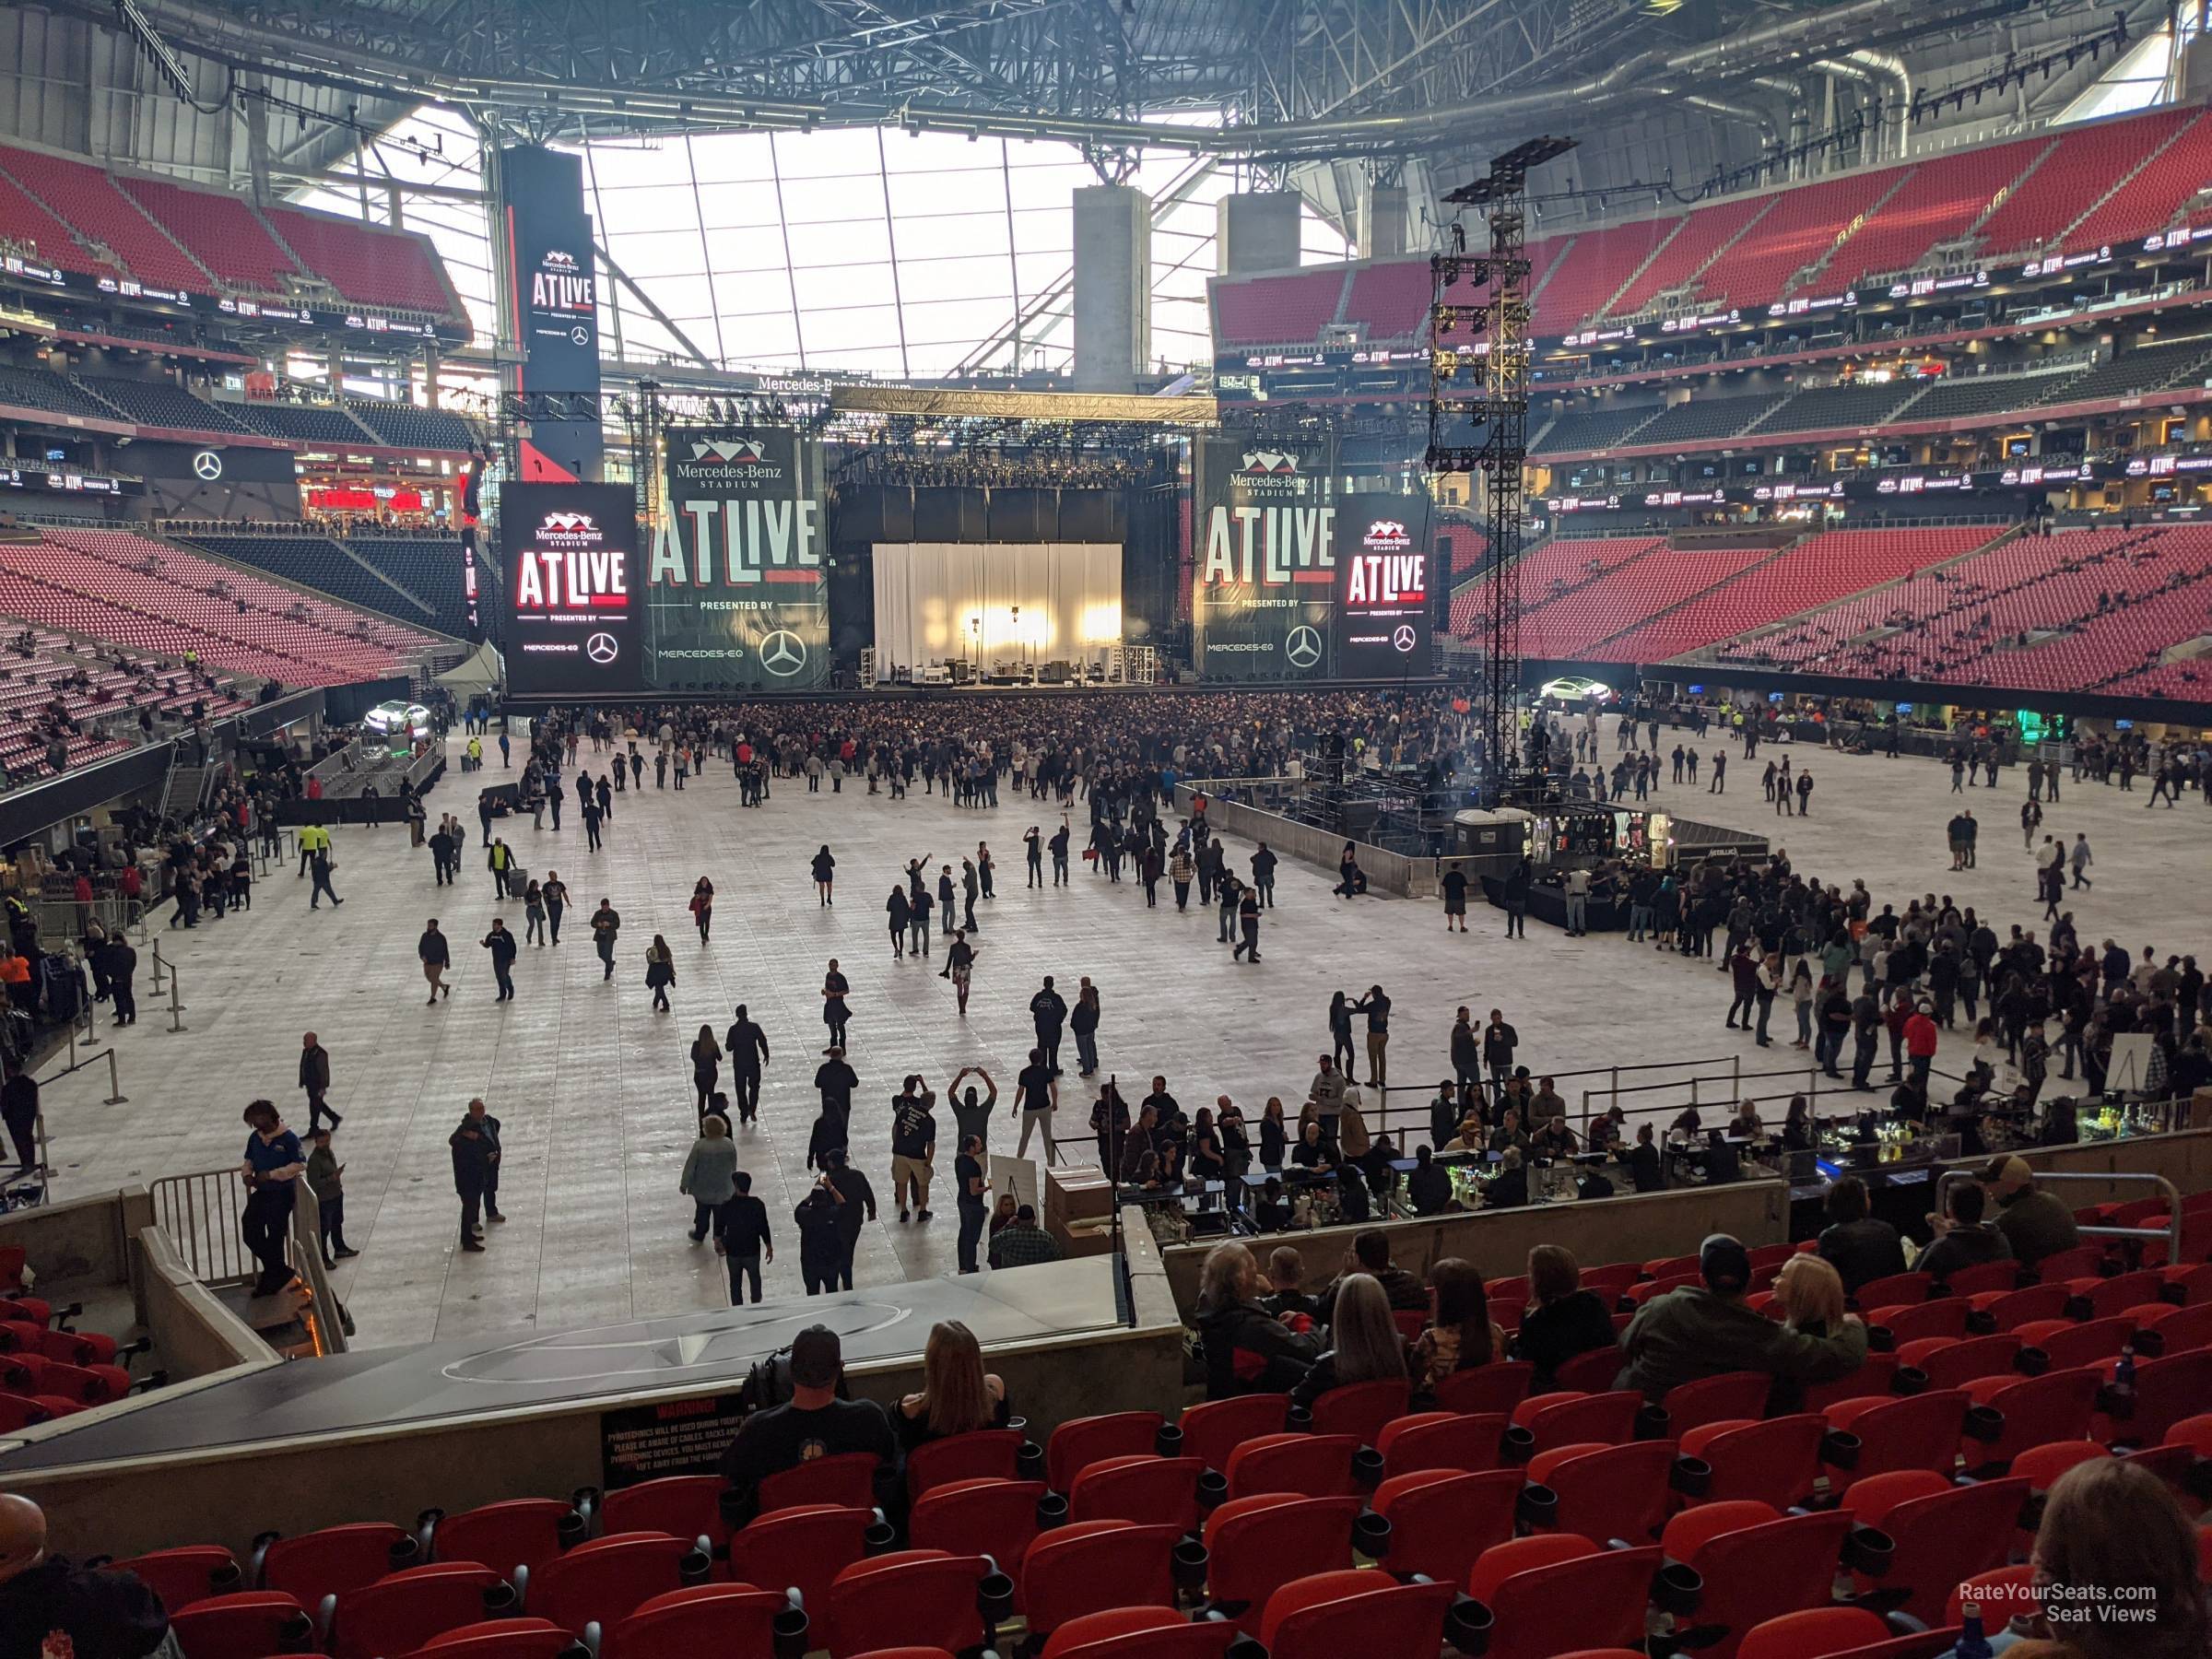 section 121, row 21 seat view  for concert - mercedes-benz stadium